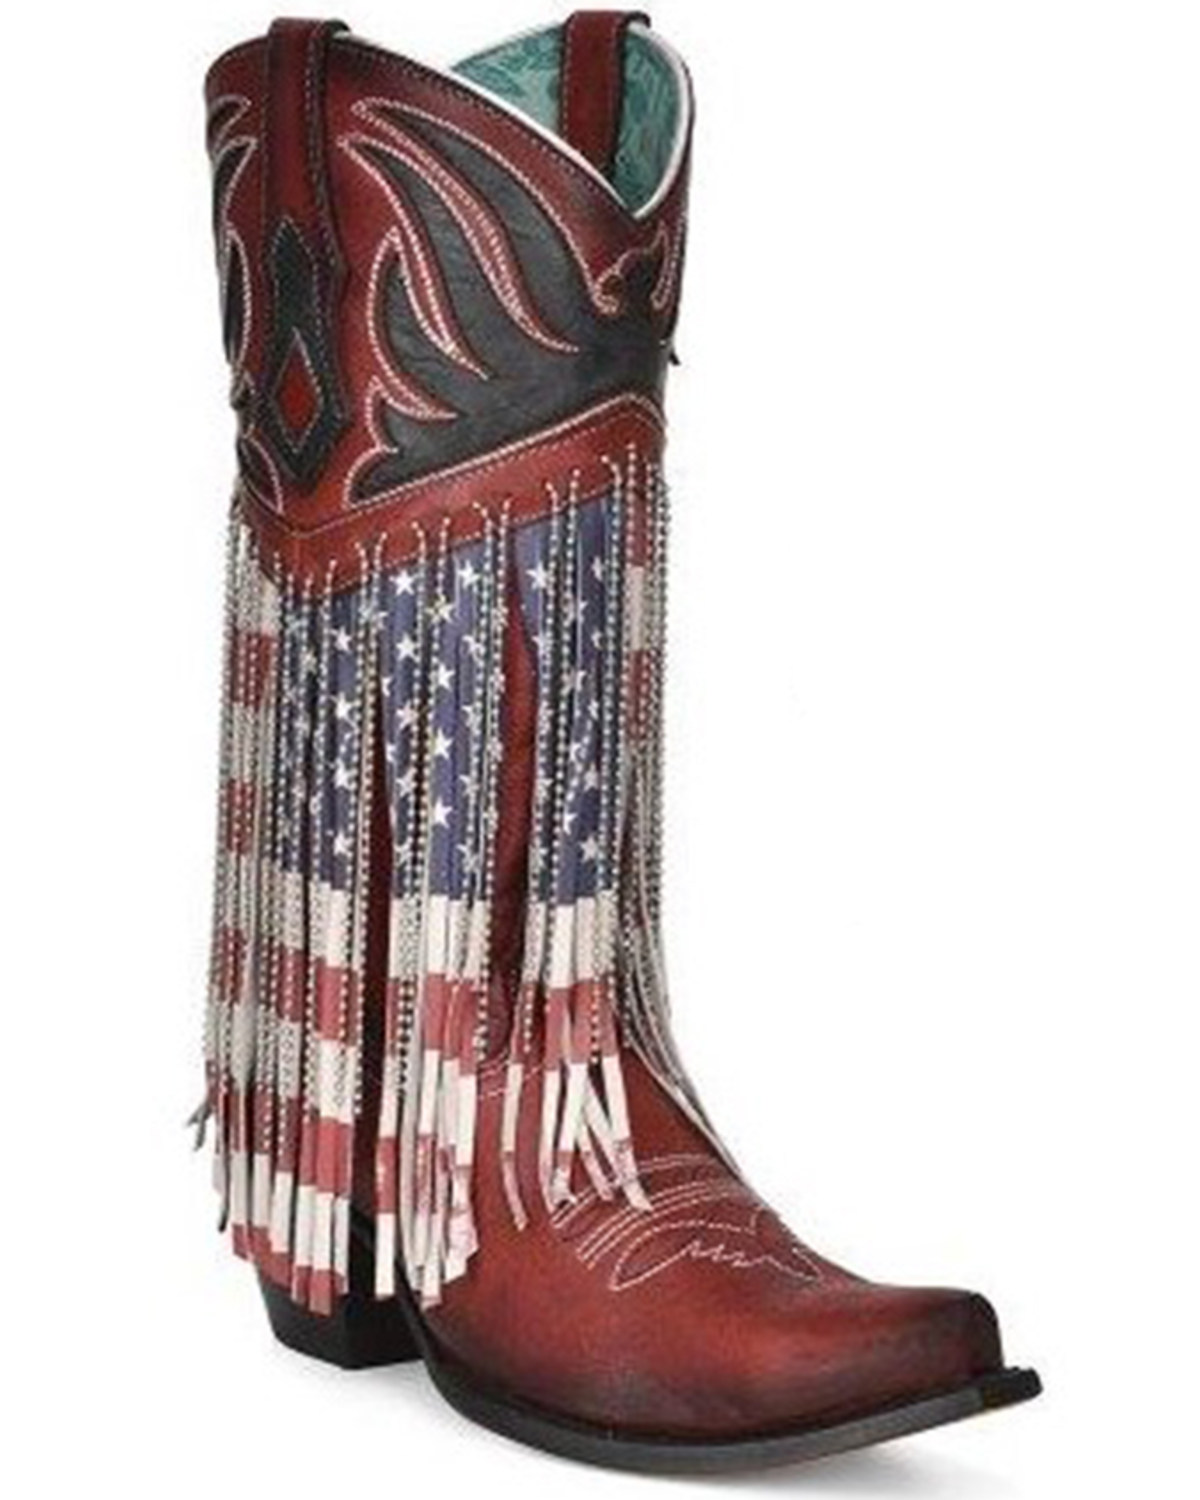 Corral Women's Stars & Striped Embellished Western Boots - Snip Toe